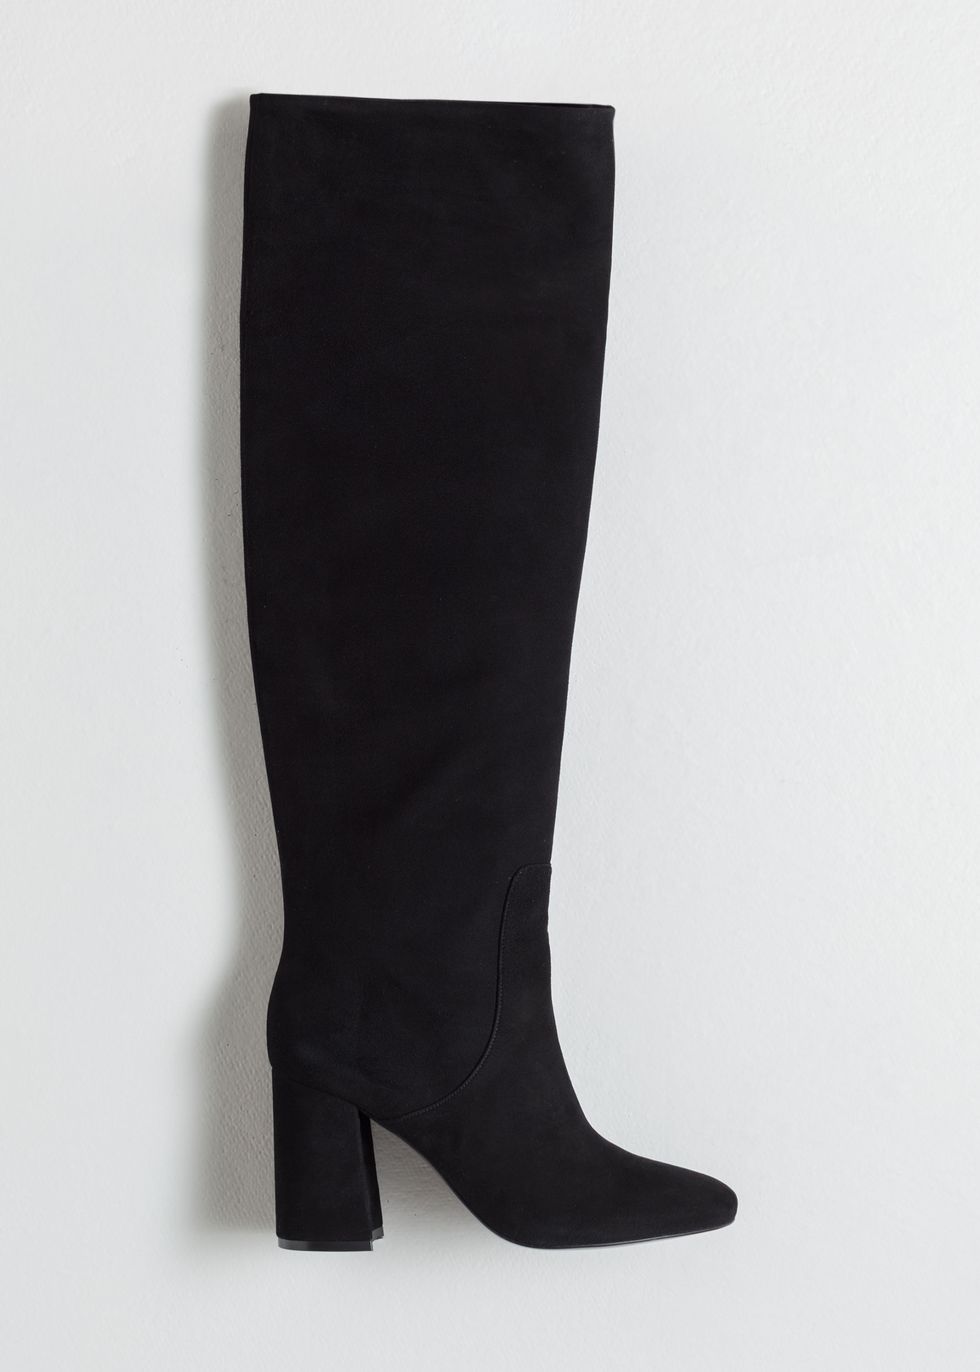 Footwear, Boot, Shoe, Knee-high boot, Riding boot, Leather, Leg, High heels, Suede, 